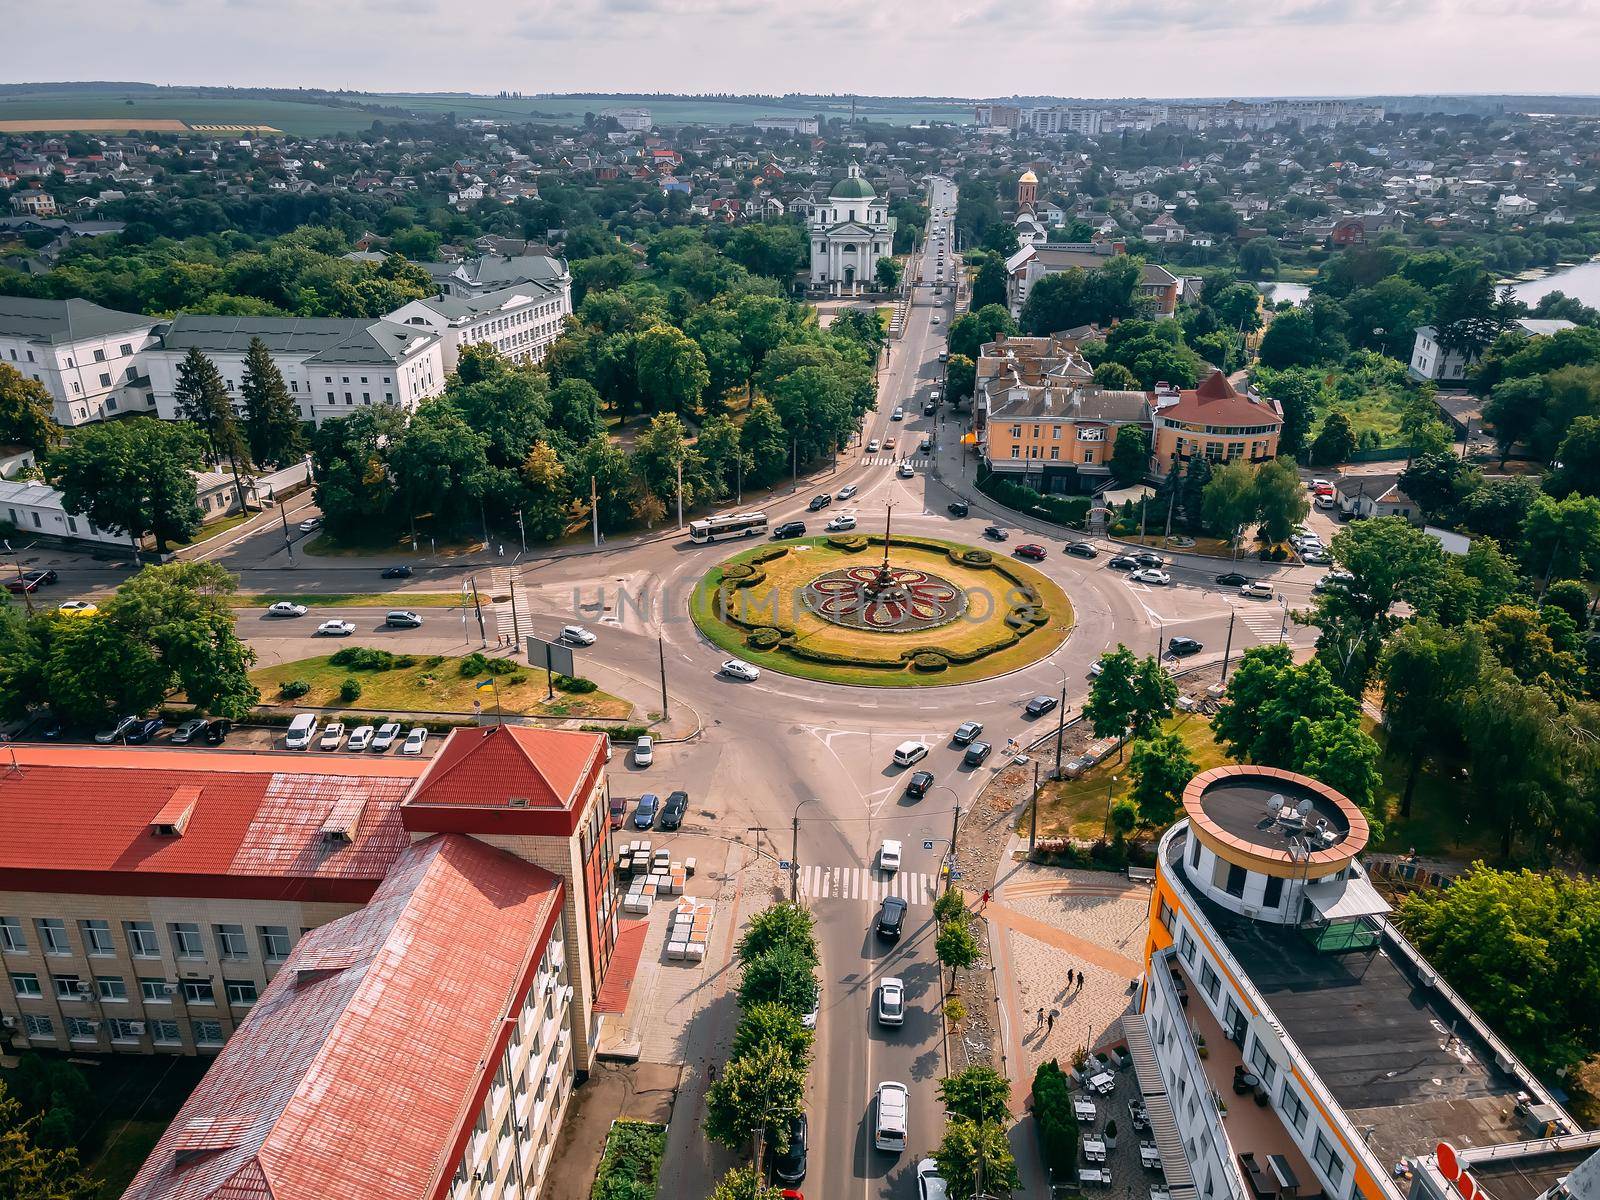 Aerial view of roundabout road with circular cars in small european city at summer afternoon, Kyiv region, Ukraine